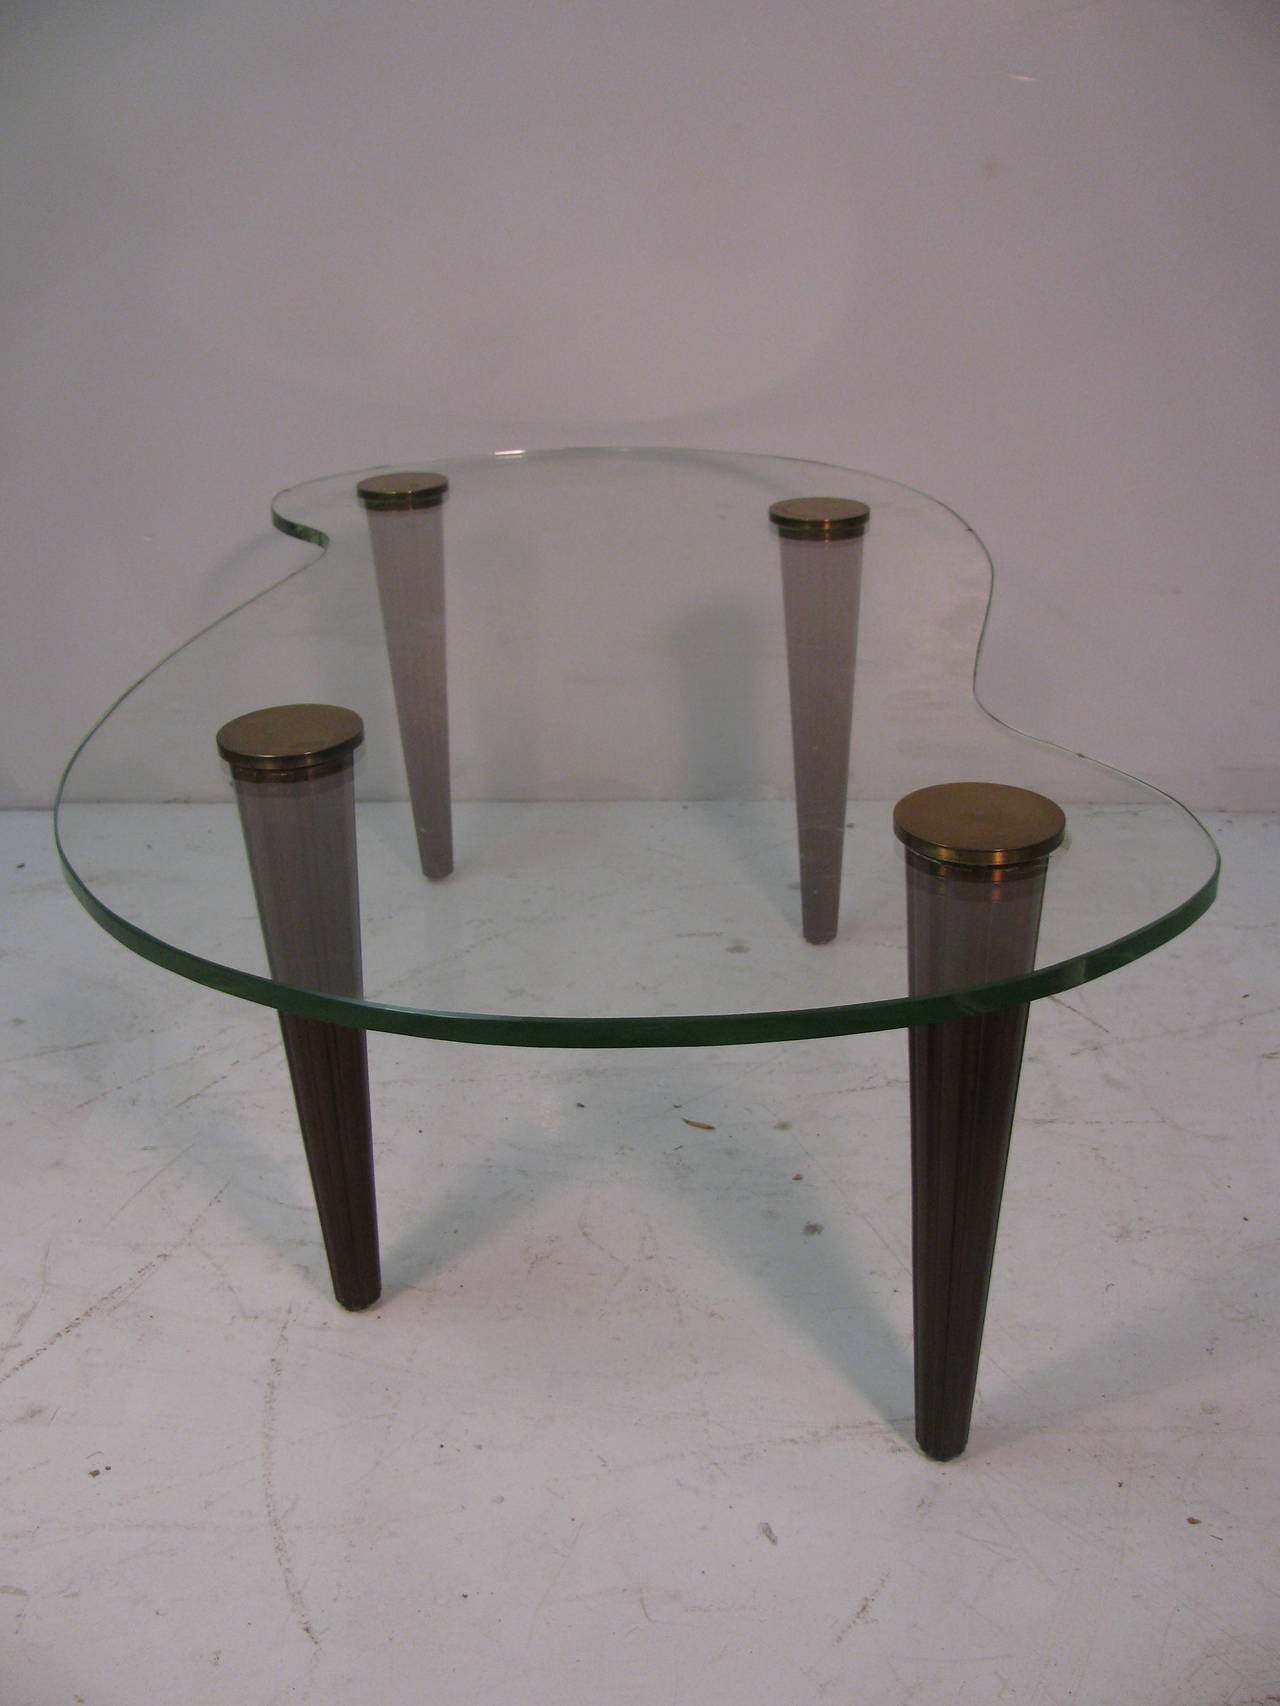 Brass Art Deco Mid Century Cloud Form Cocktail Table Gilbert Rohde